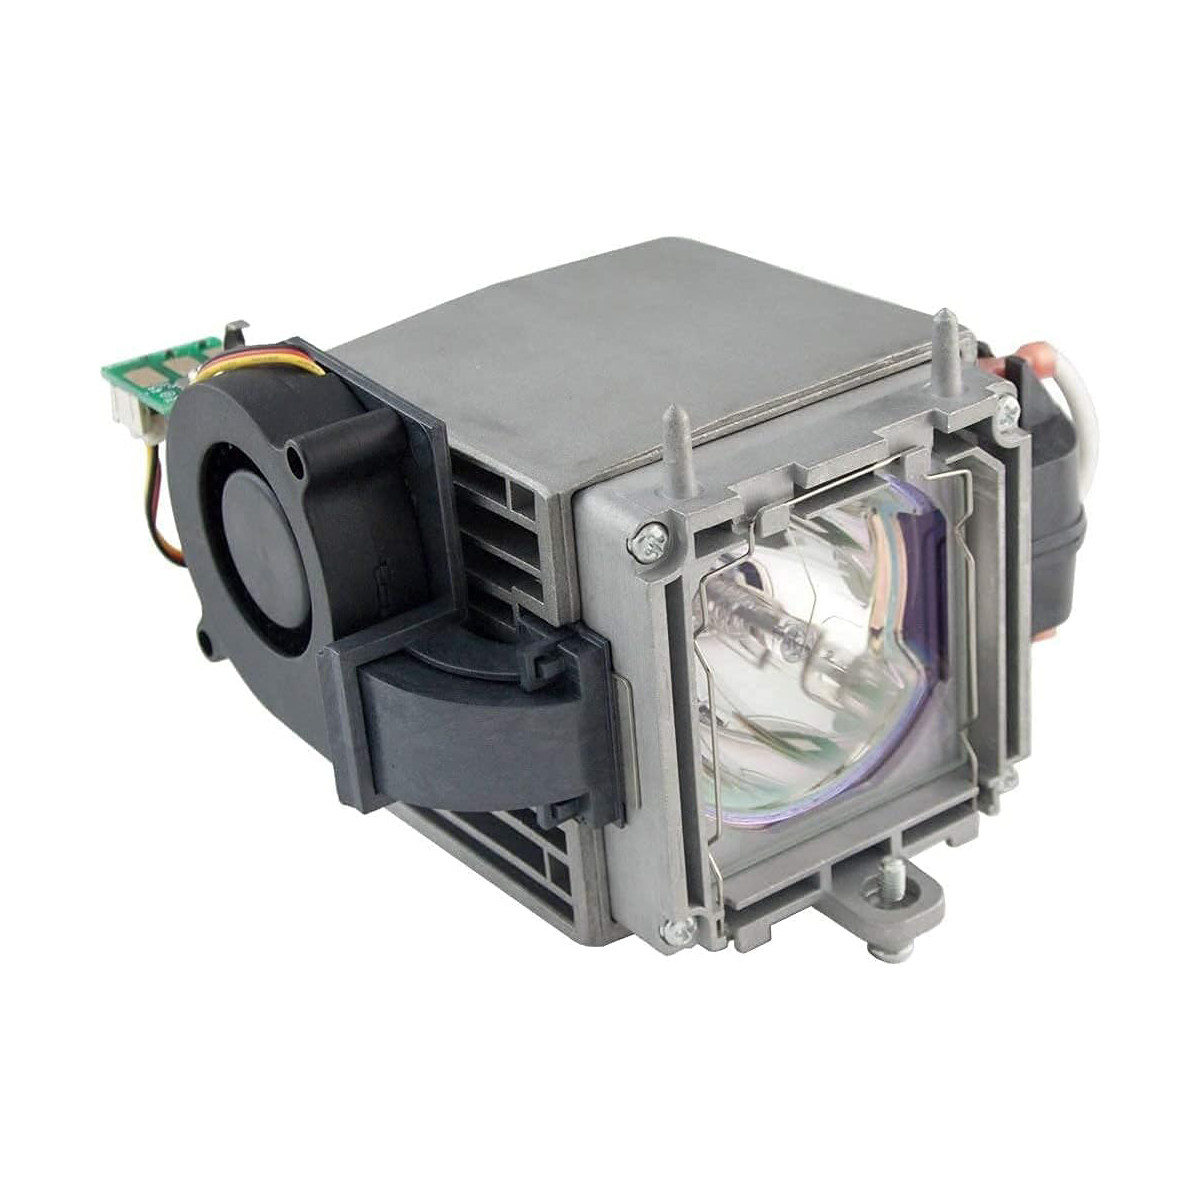 Replacement Projector lamp RLC-032 For VIEWSONIC HD9900 Pro8100